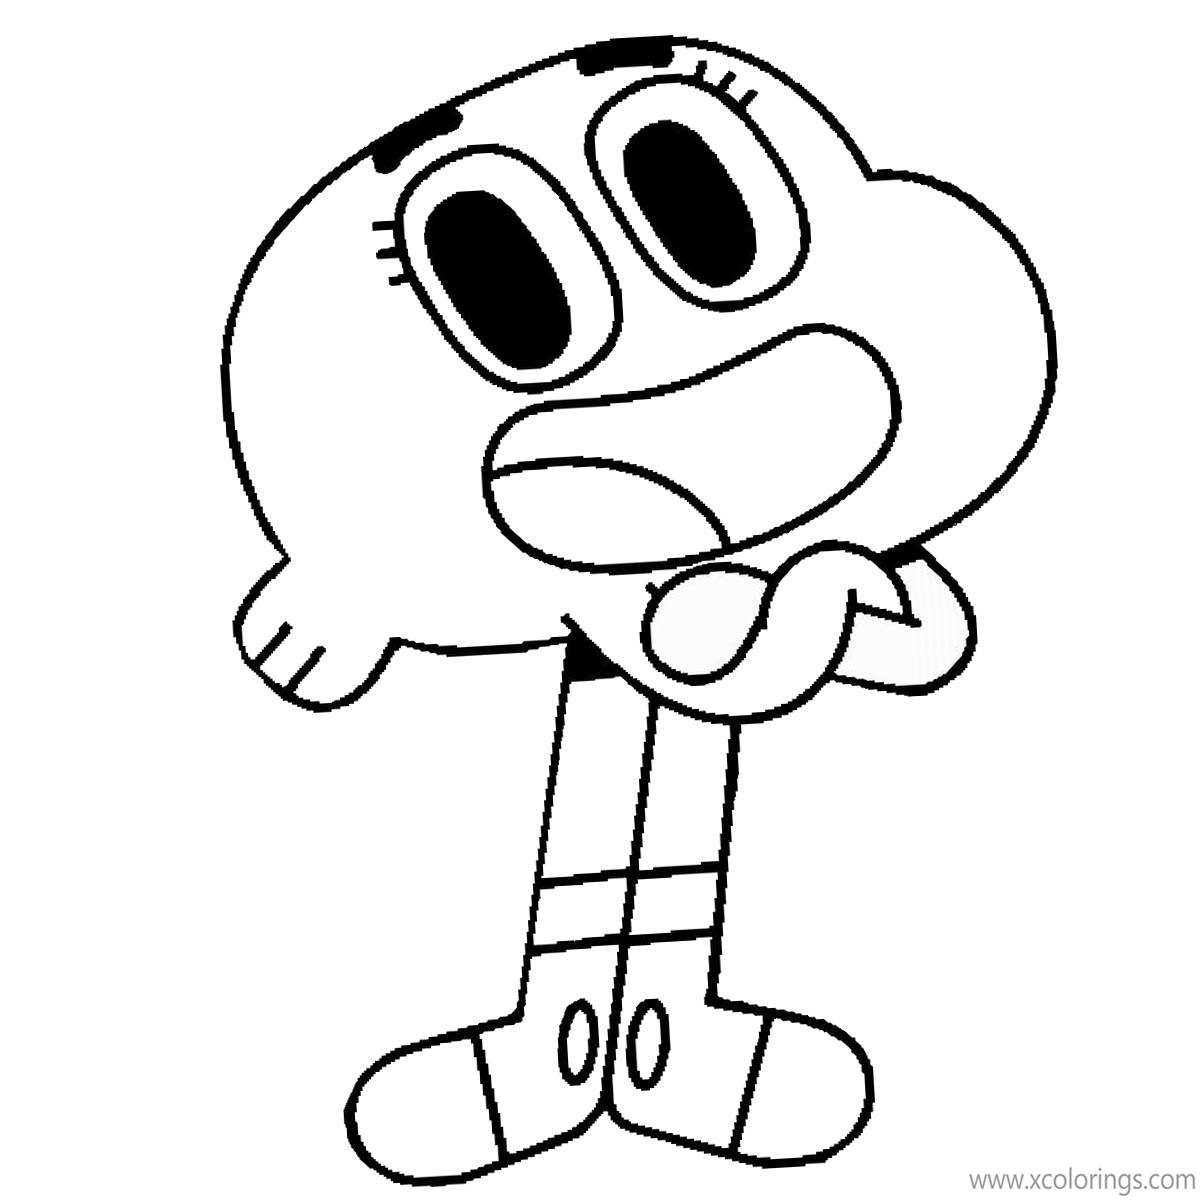 gumball-and-darwin-coloring-pages-boringpop